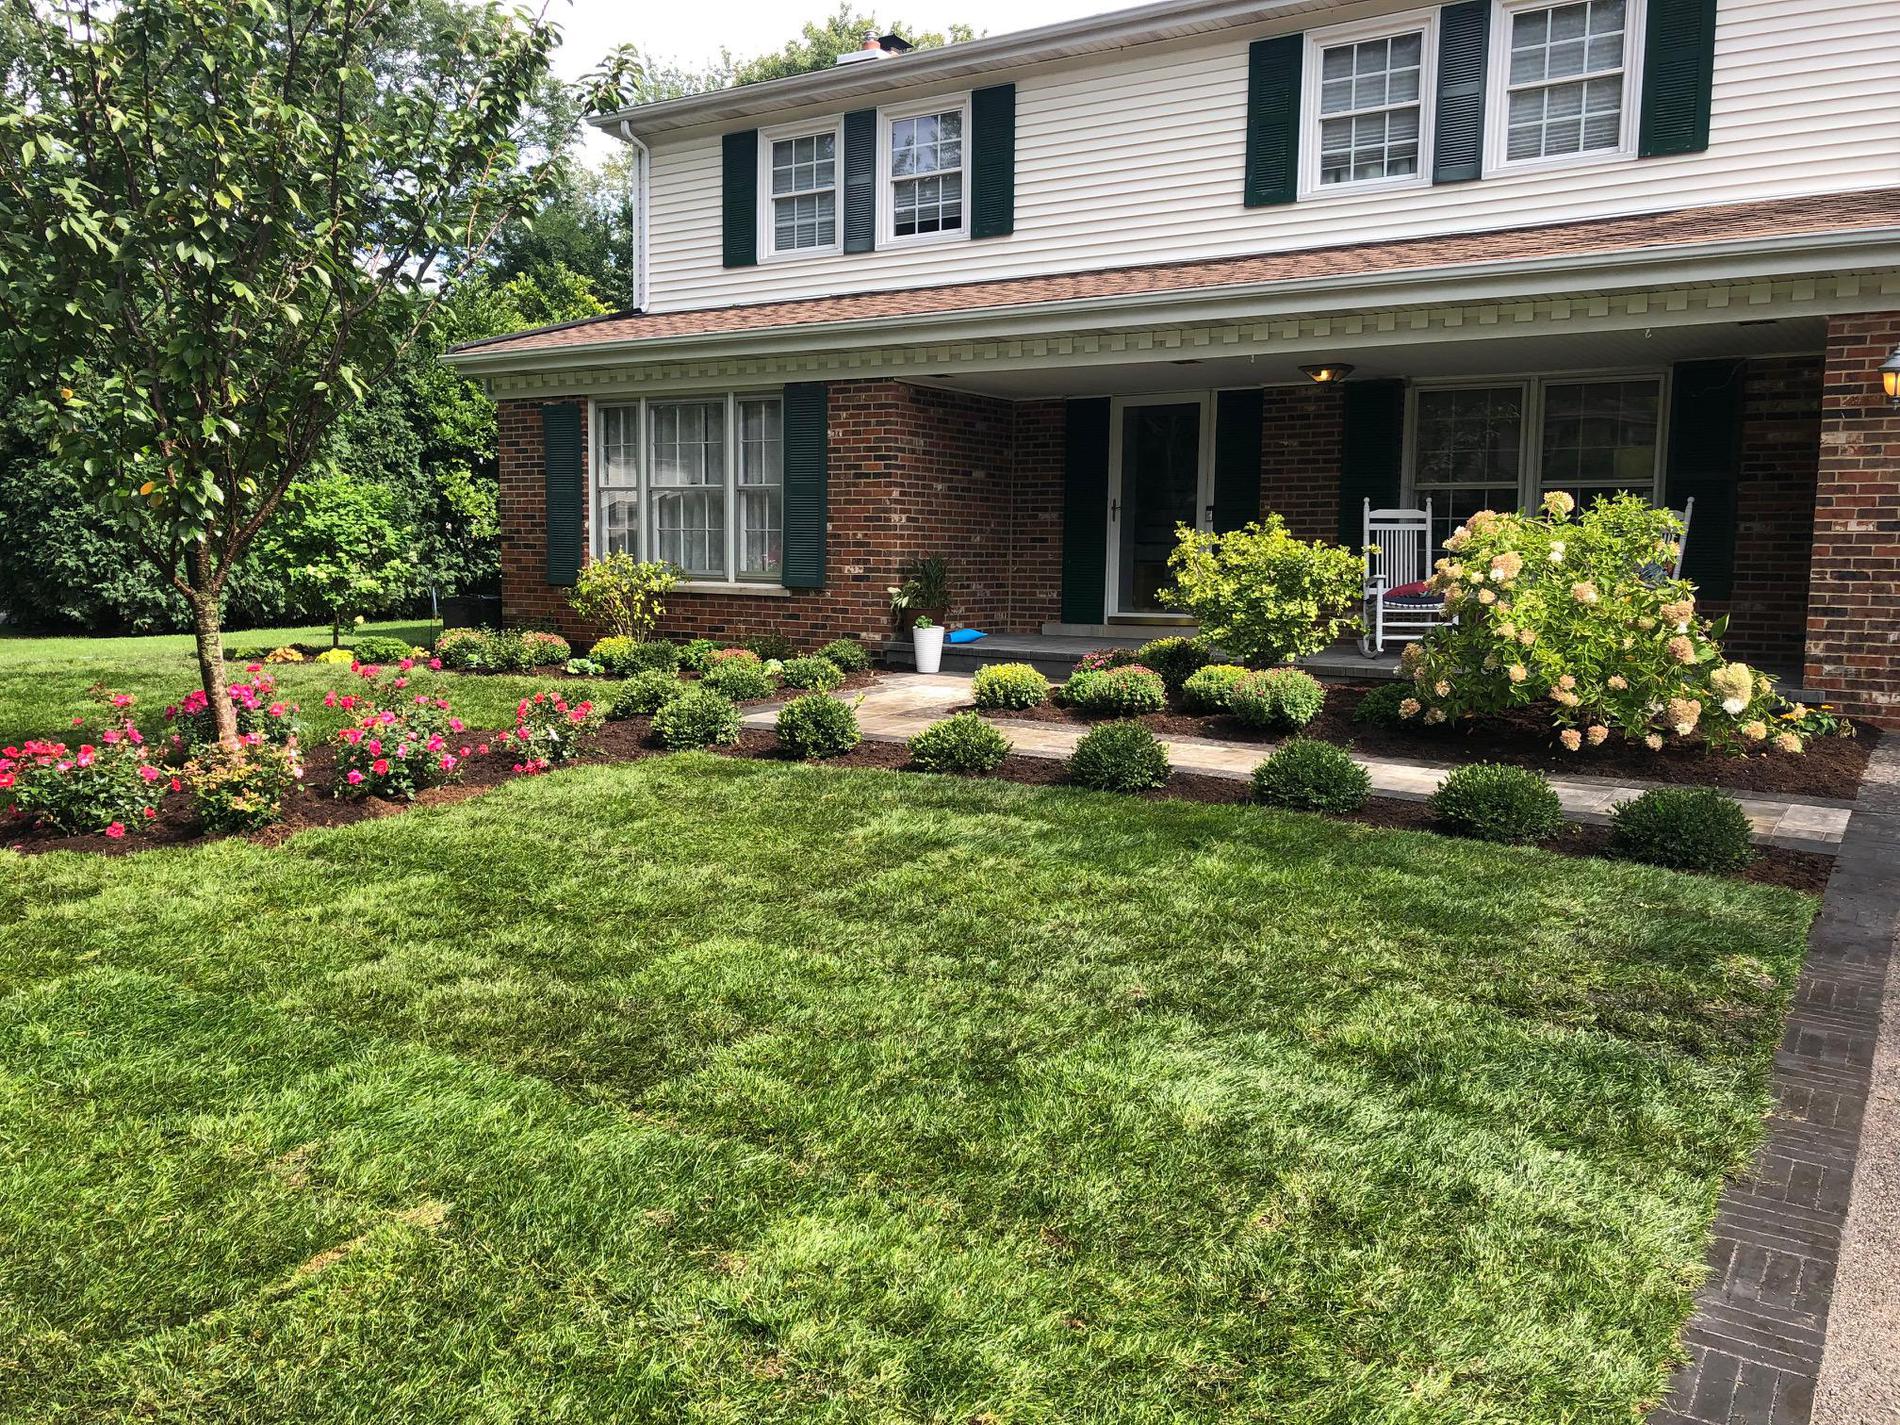 Redesigned front landscape, new brick walkway and porch, and new sod. Northbrook, IL